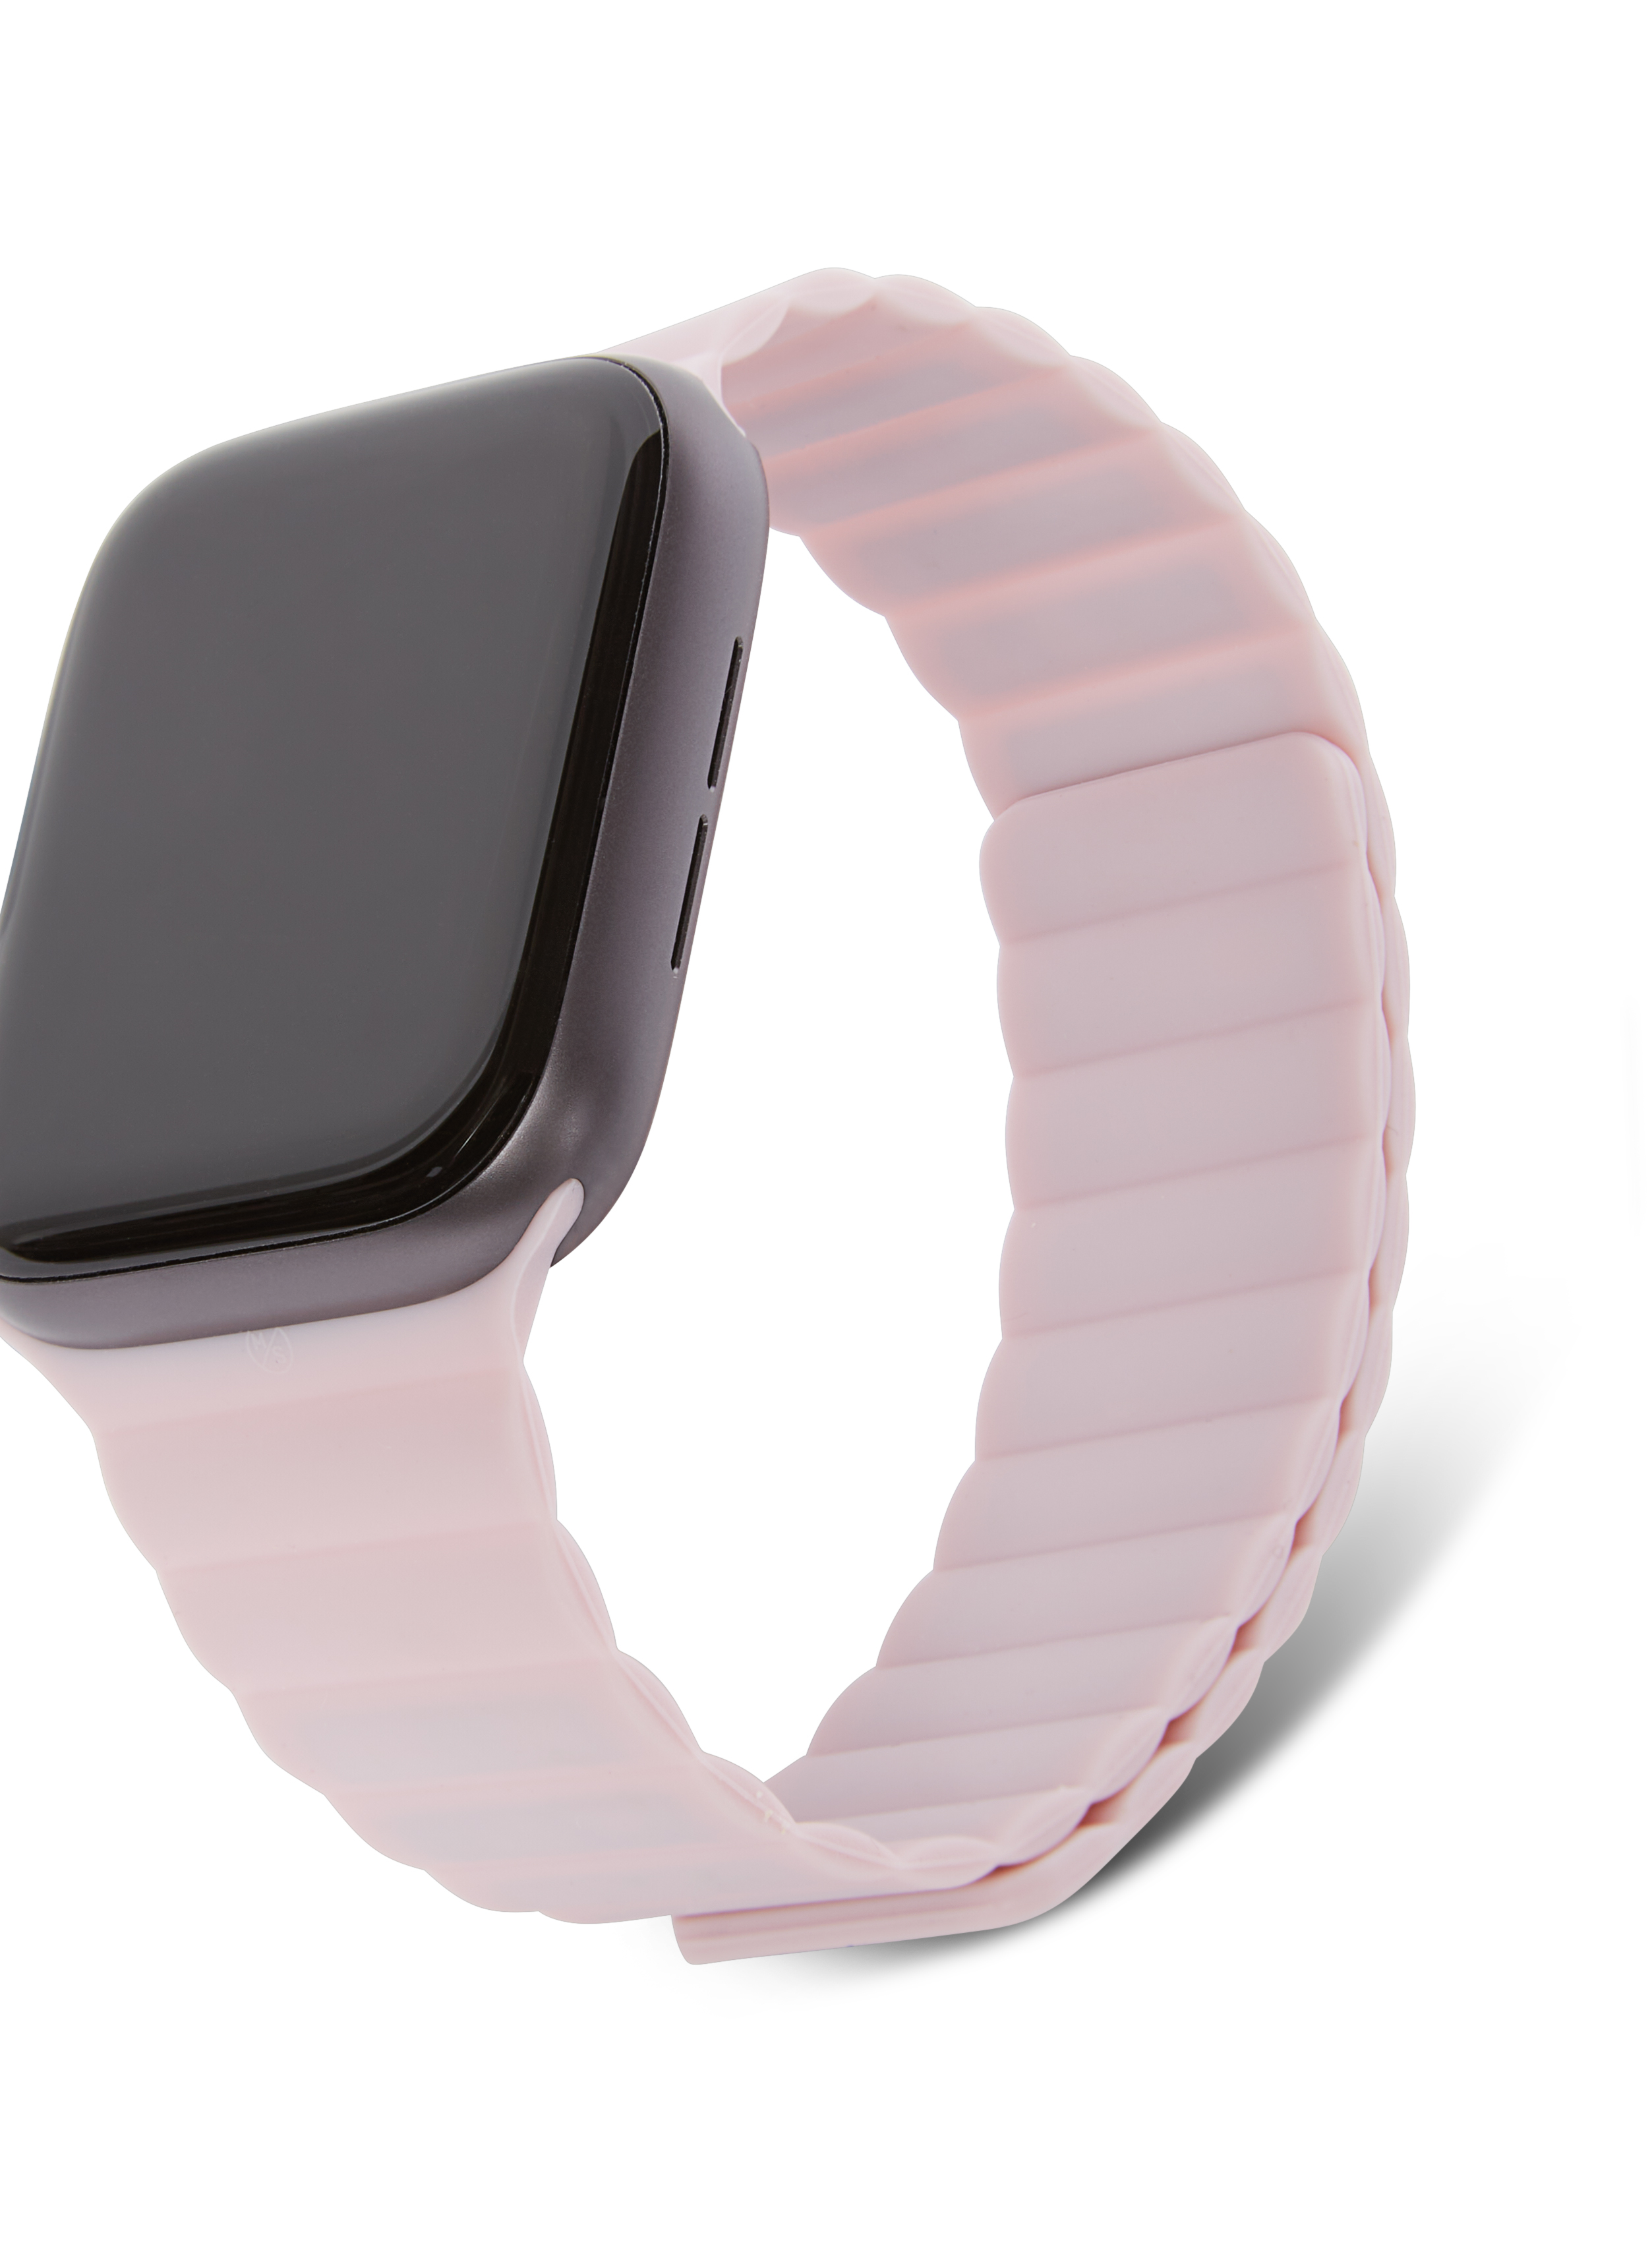 Apple watch 44mm/42mm, silicone magnetic traction strap, powder pink